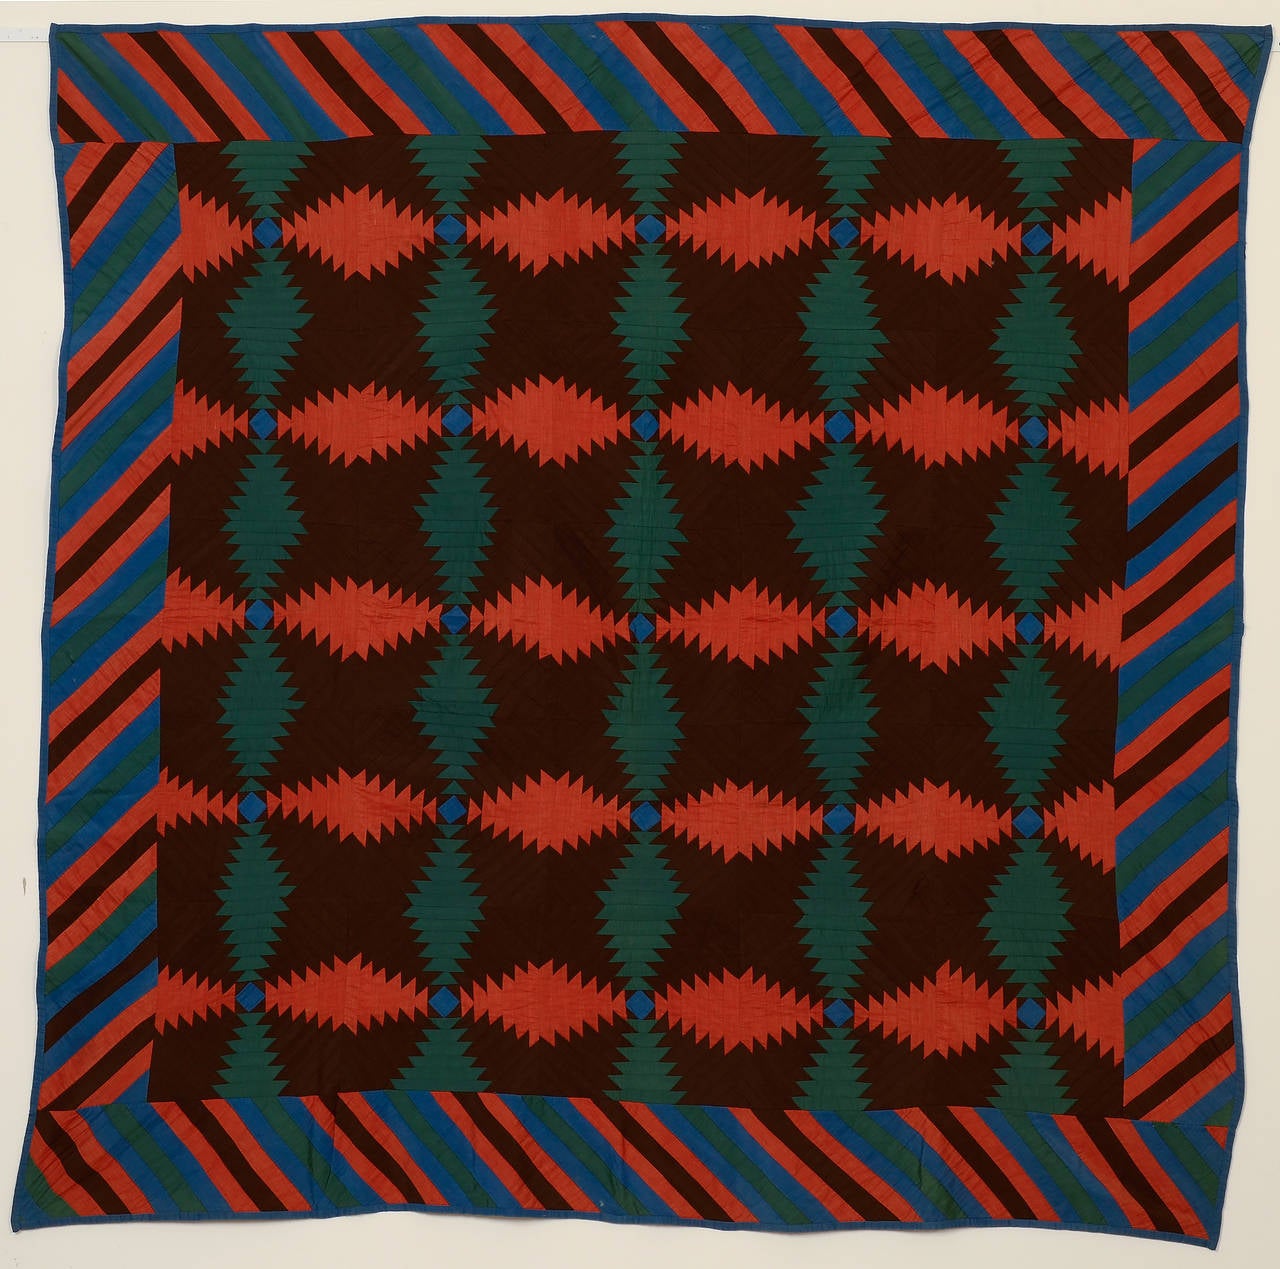 This powerful windmill blades (aka Pineapple) log cabin quilt is unusually sophisticated in its use of color. The rich chocolate brown, salmon, blue and green work perfectly together. The piano key border is a clever continuation of the shape of the